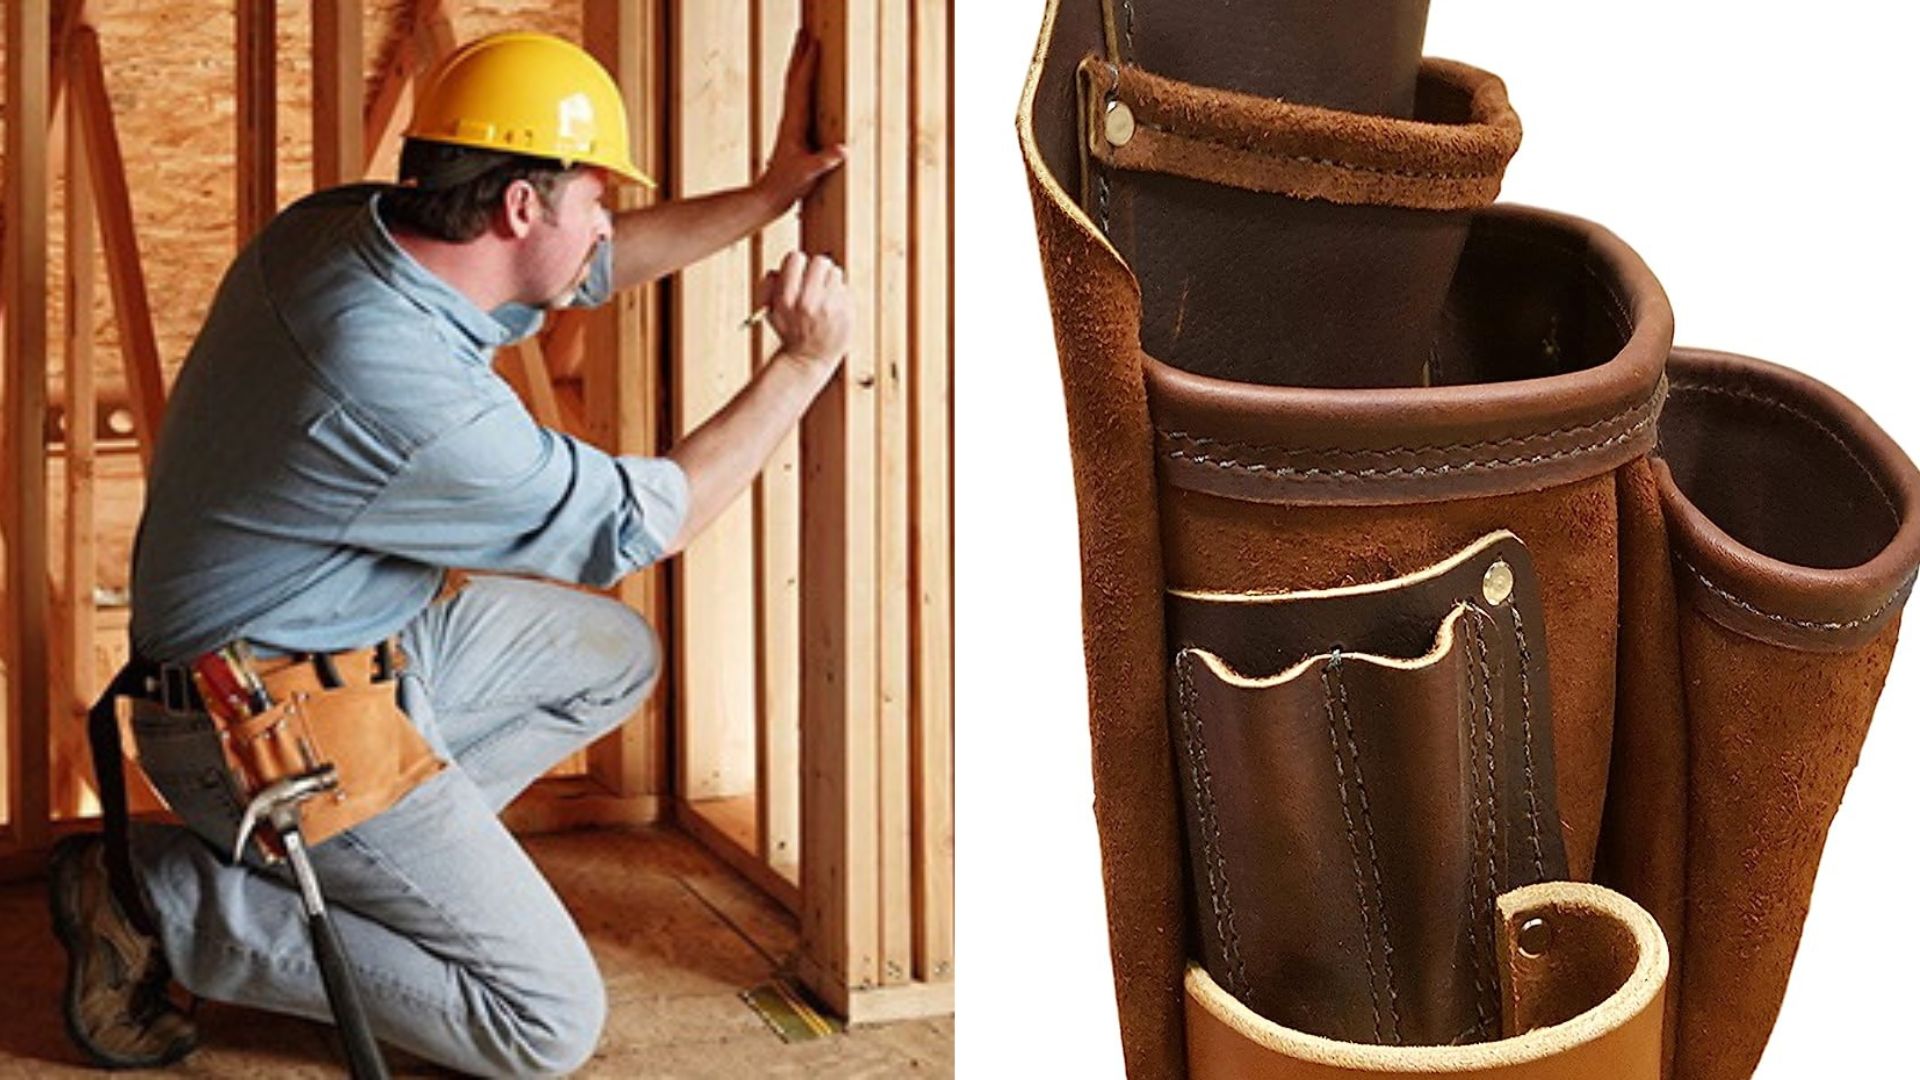 A man wearing a tool bag while working on a wooden door.